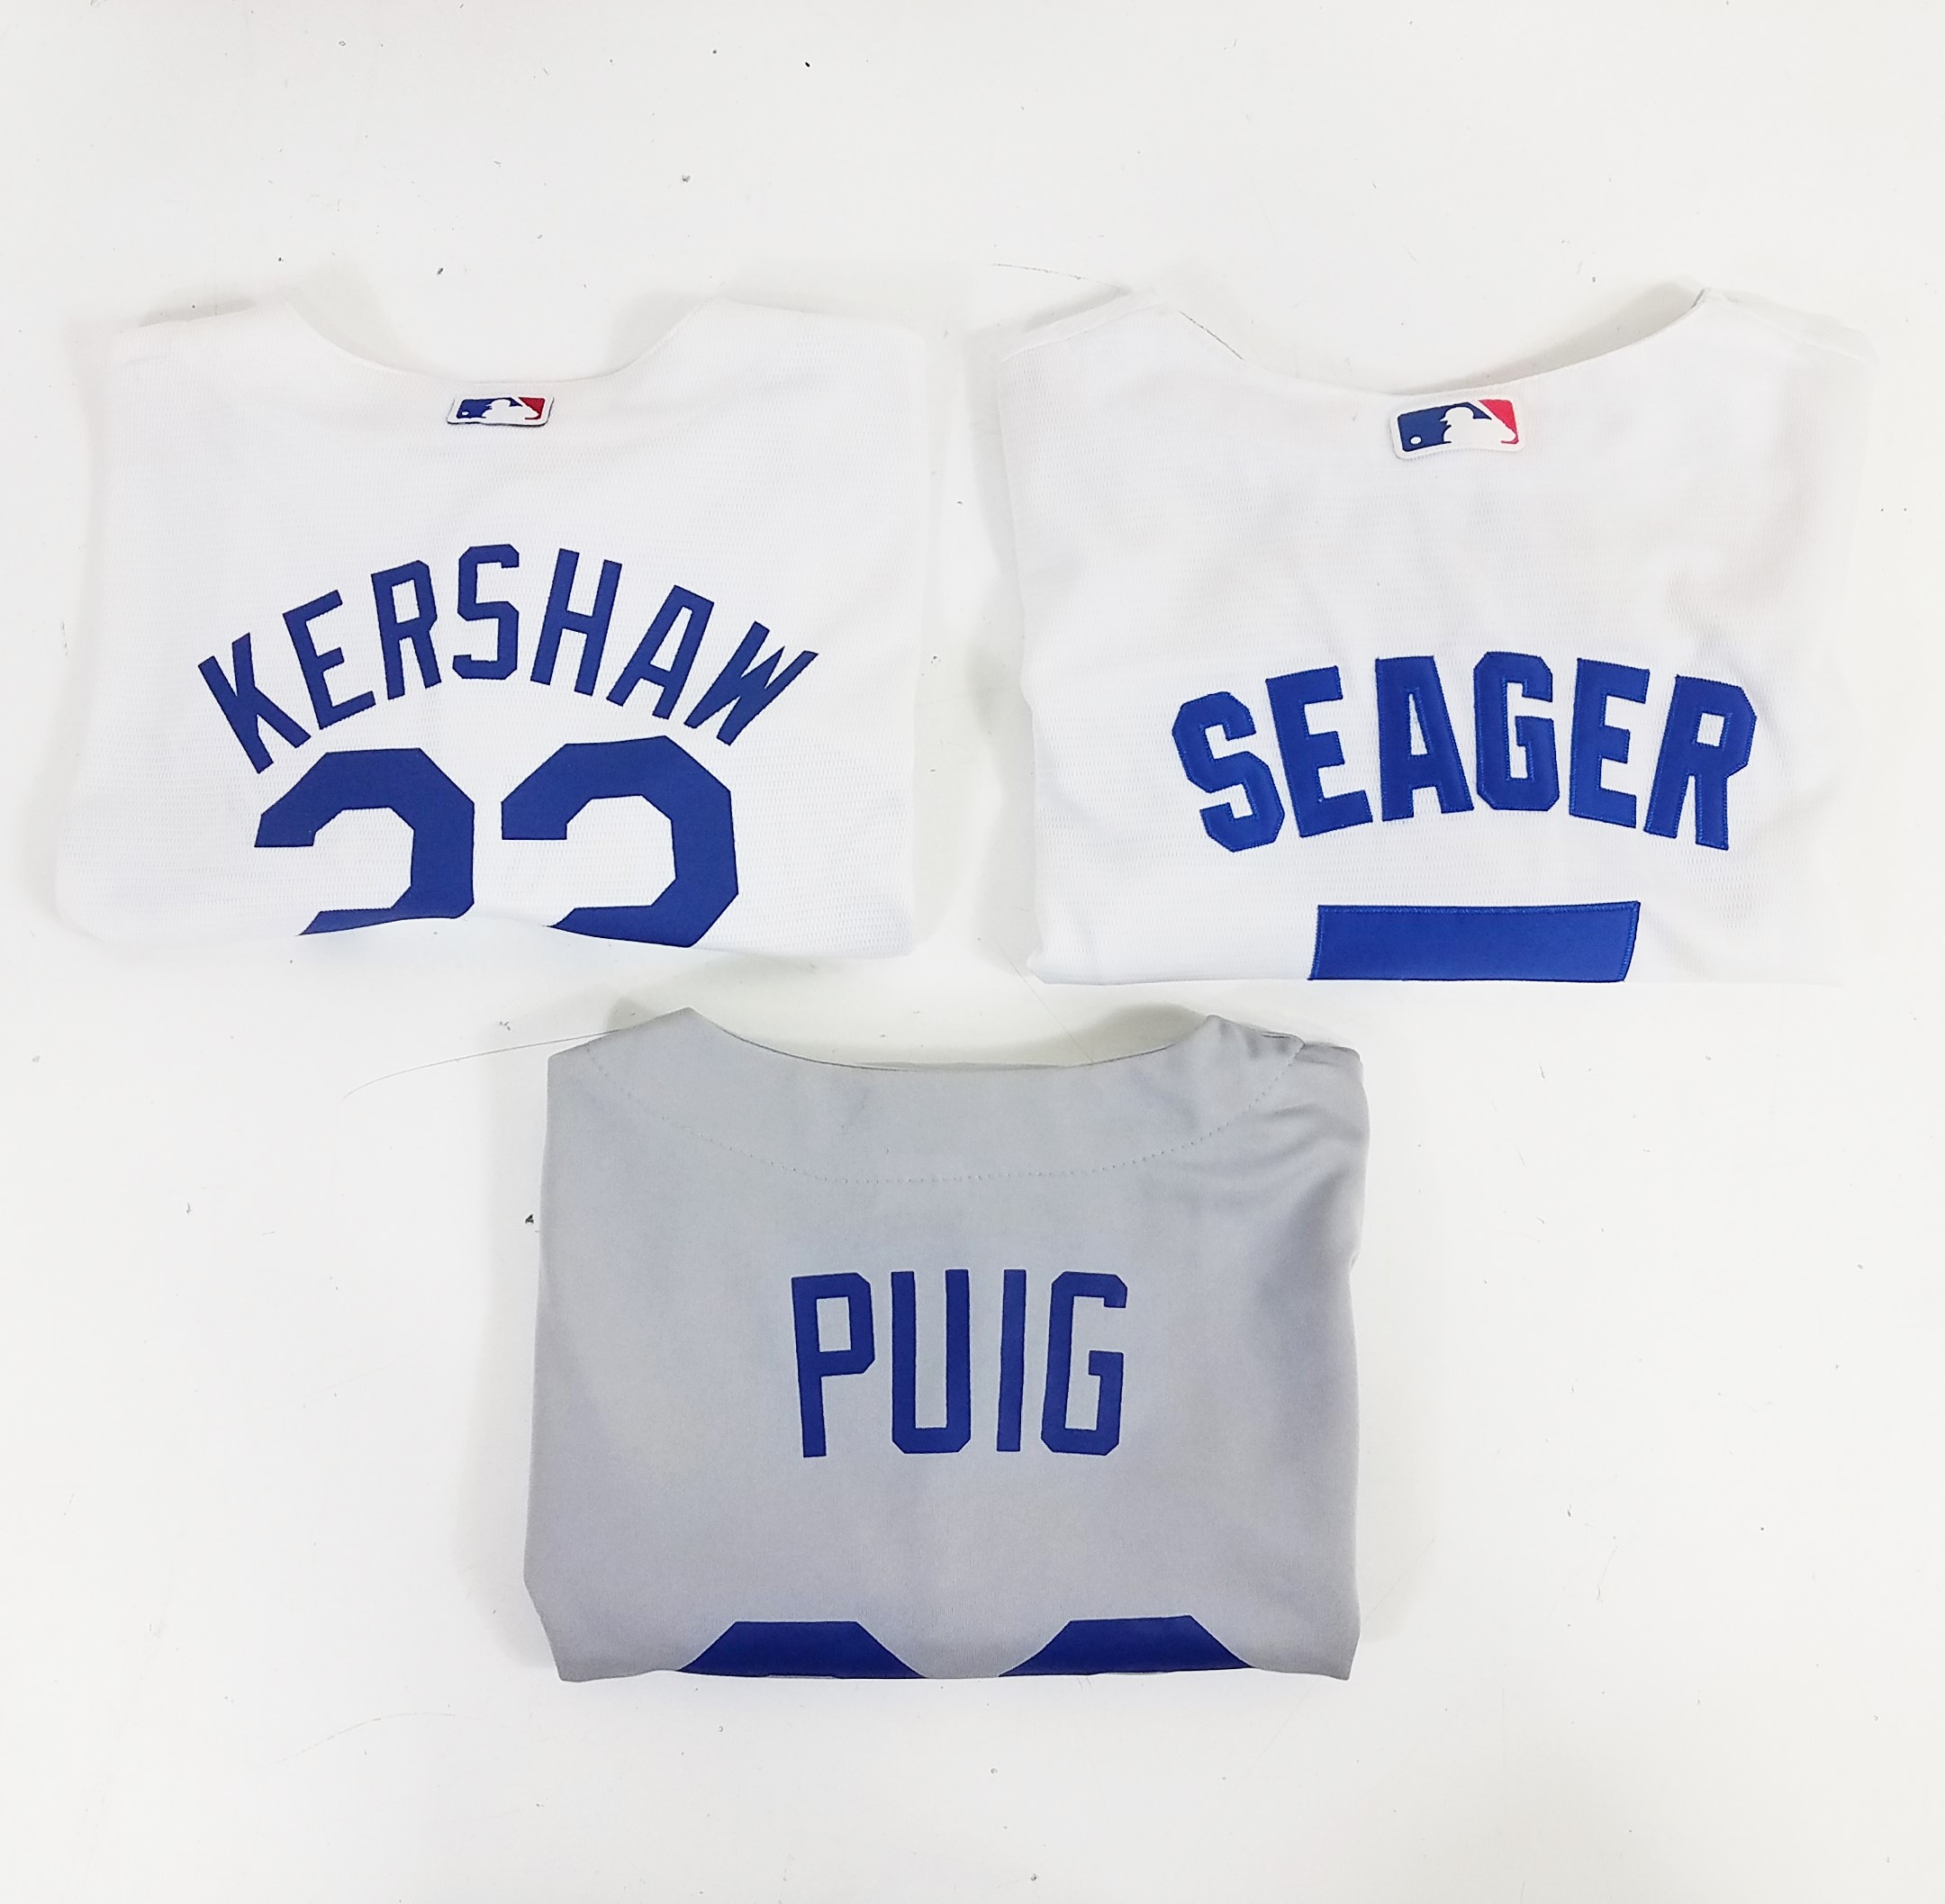 dodgers youth jerseys